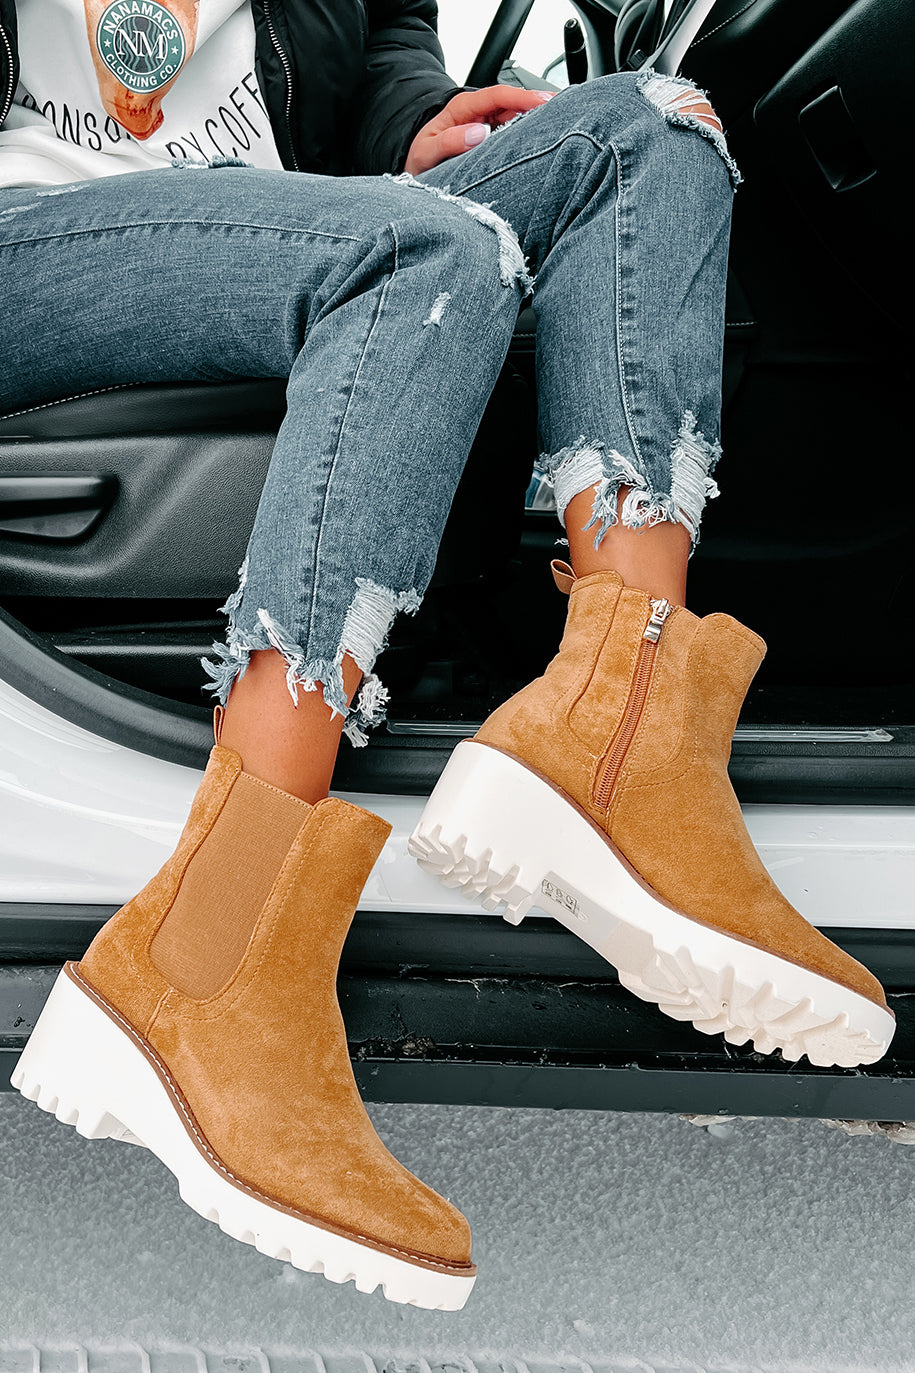 Easily Empowered Faux Suede Booties (Camel) - NanaMacs